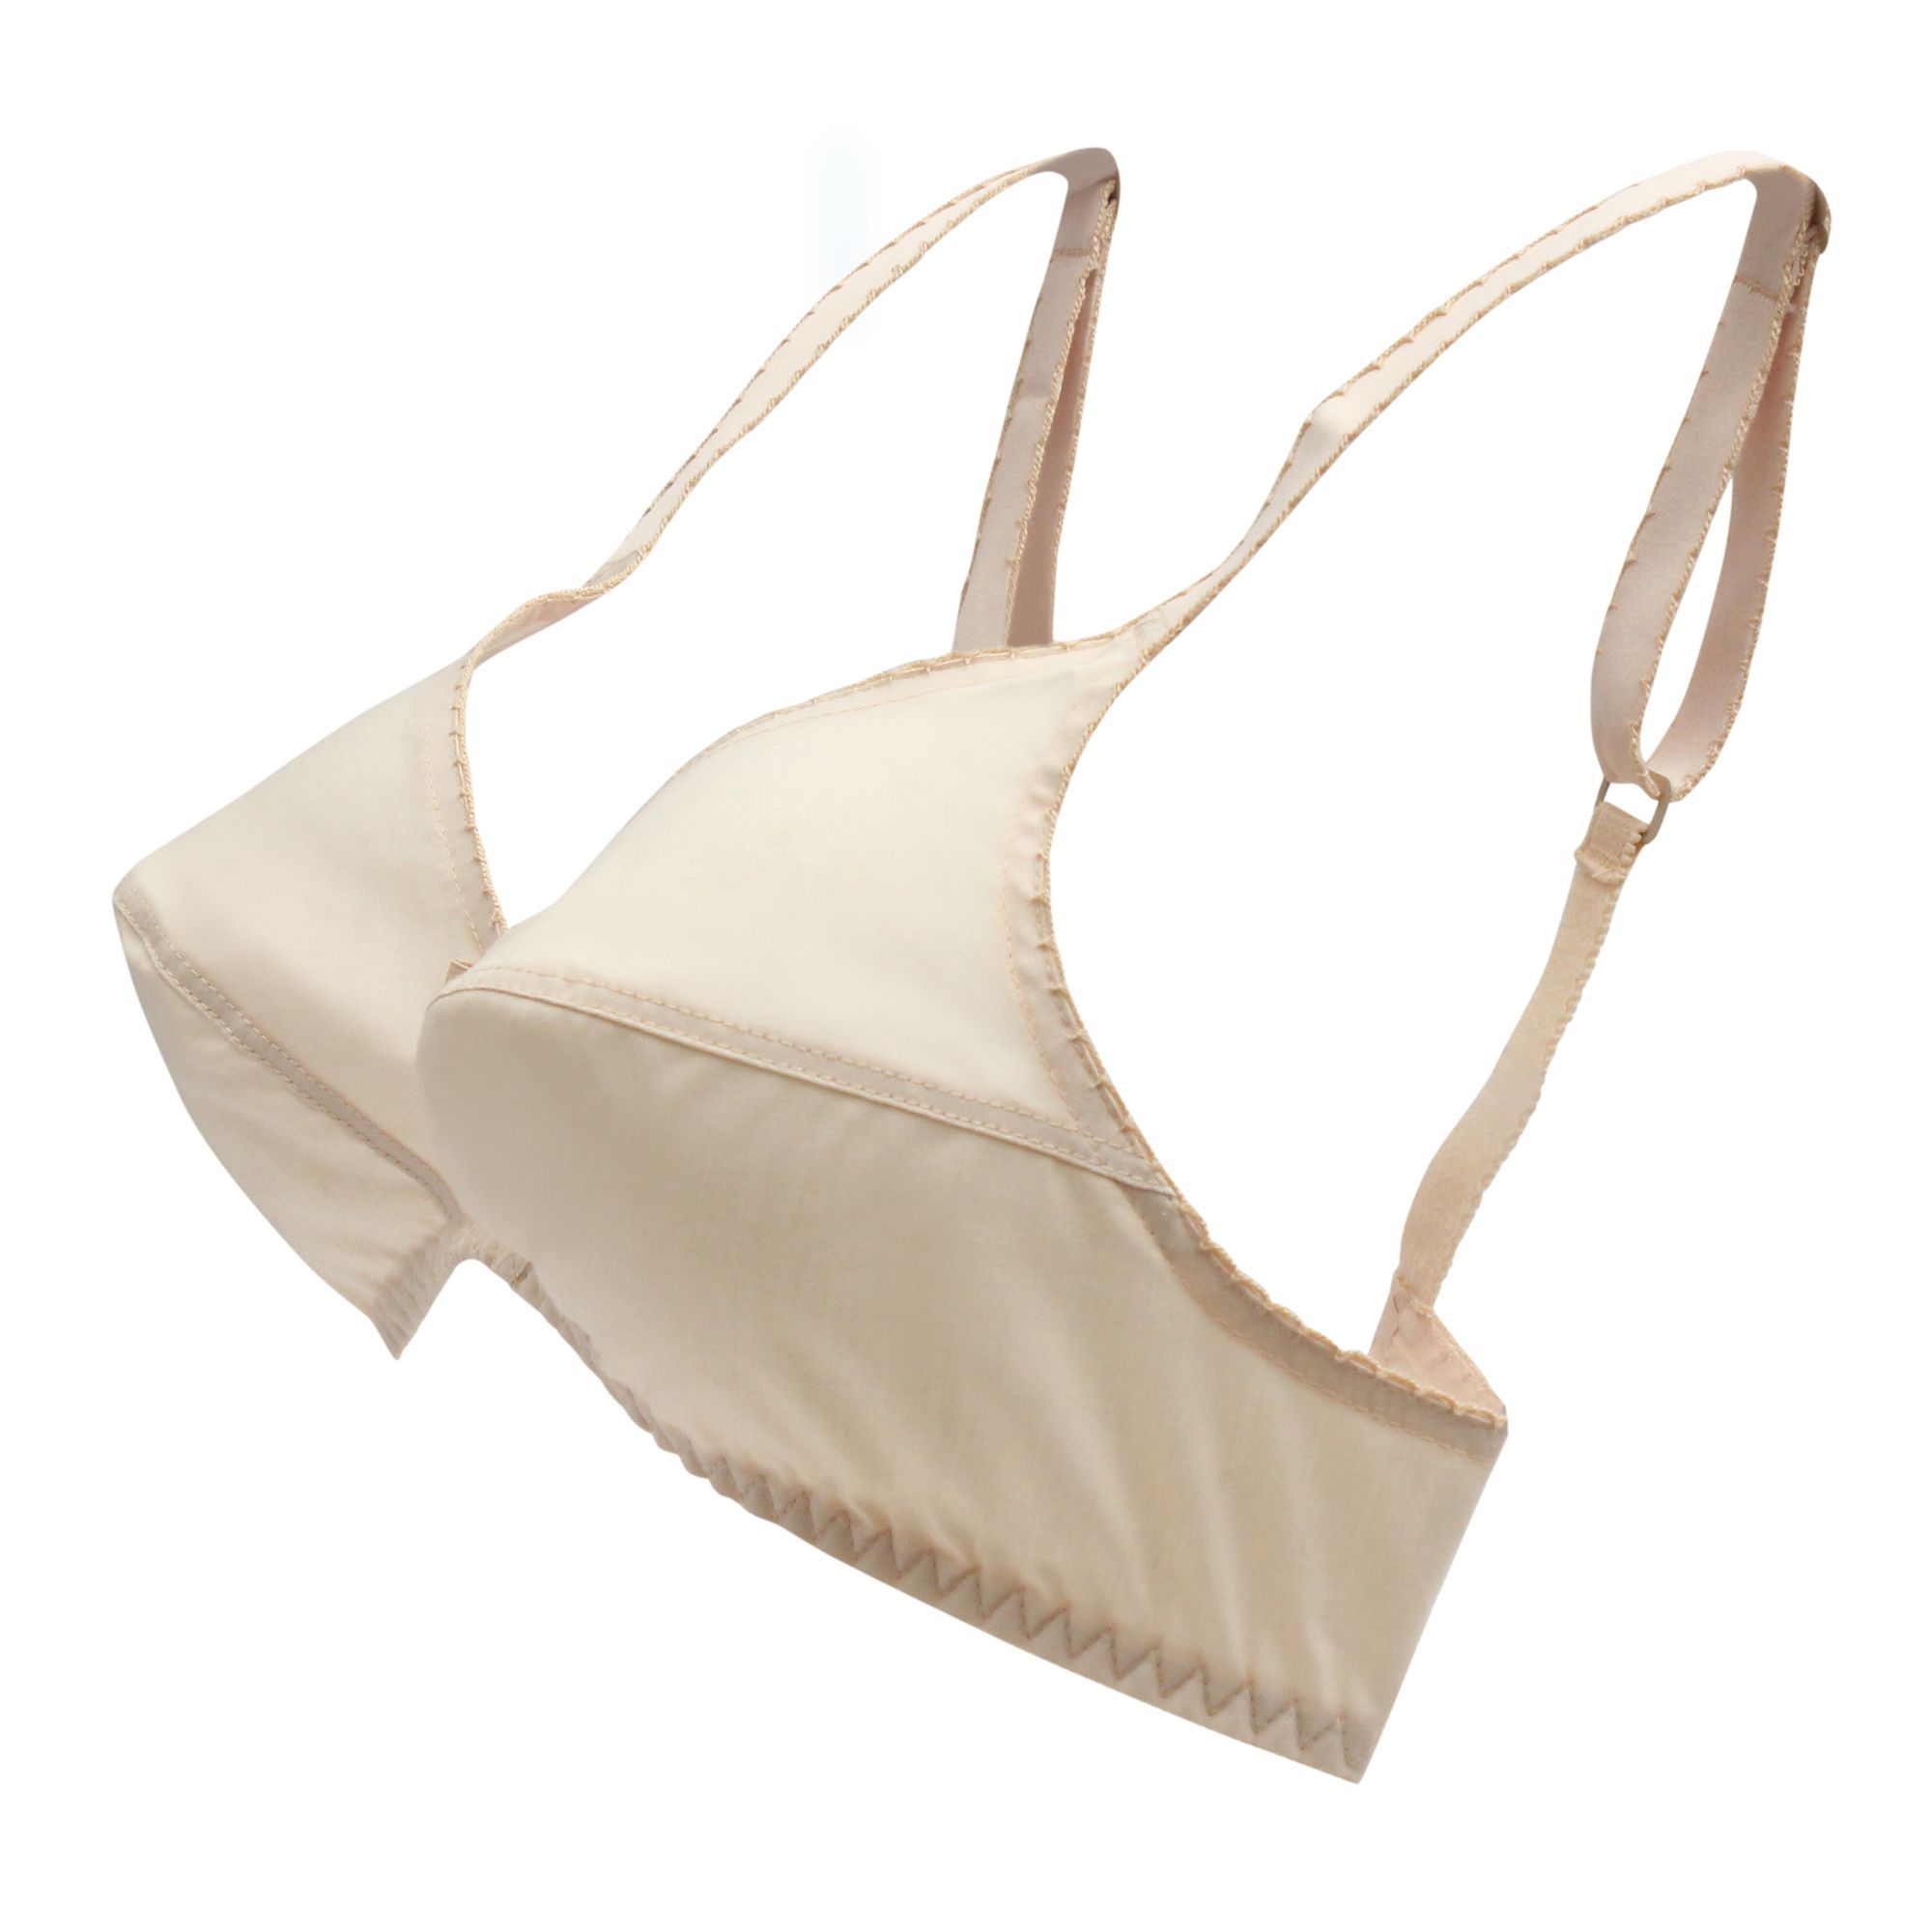 Order IFG Classic Bra, Skin Online at Special Price in Pakistan